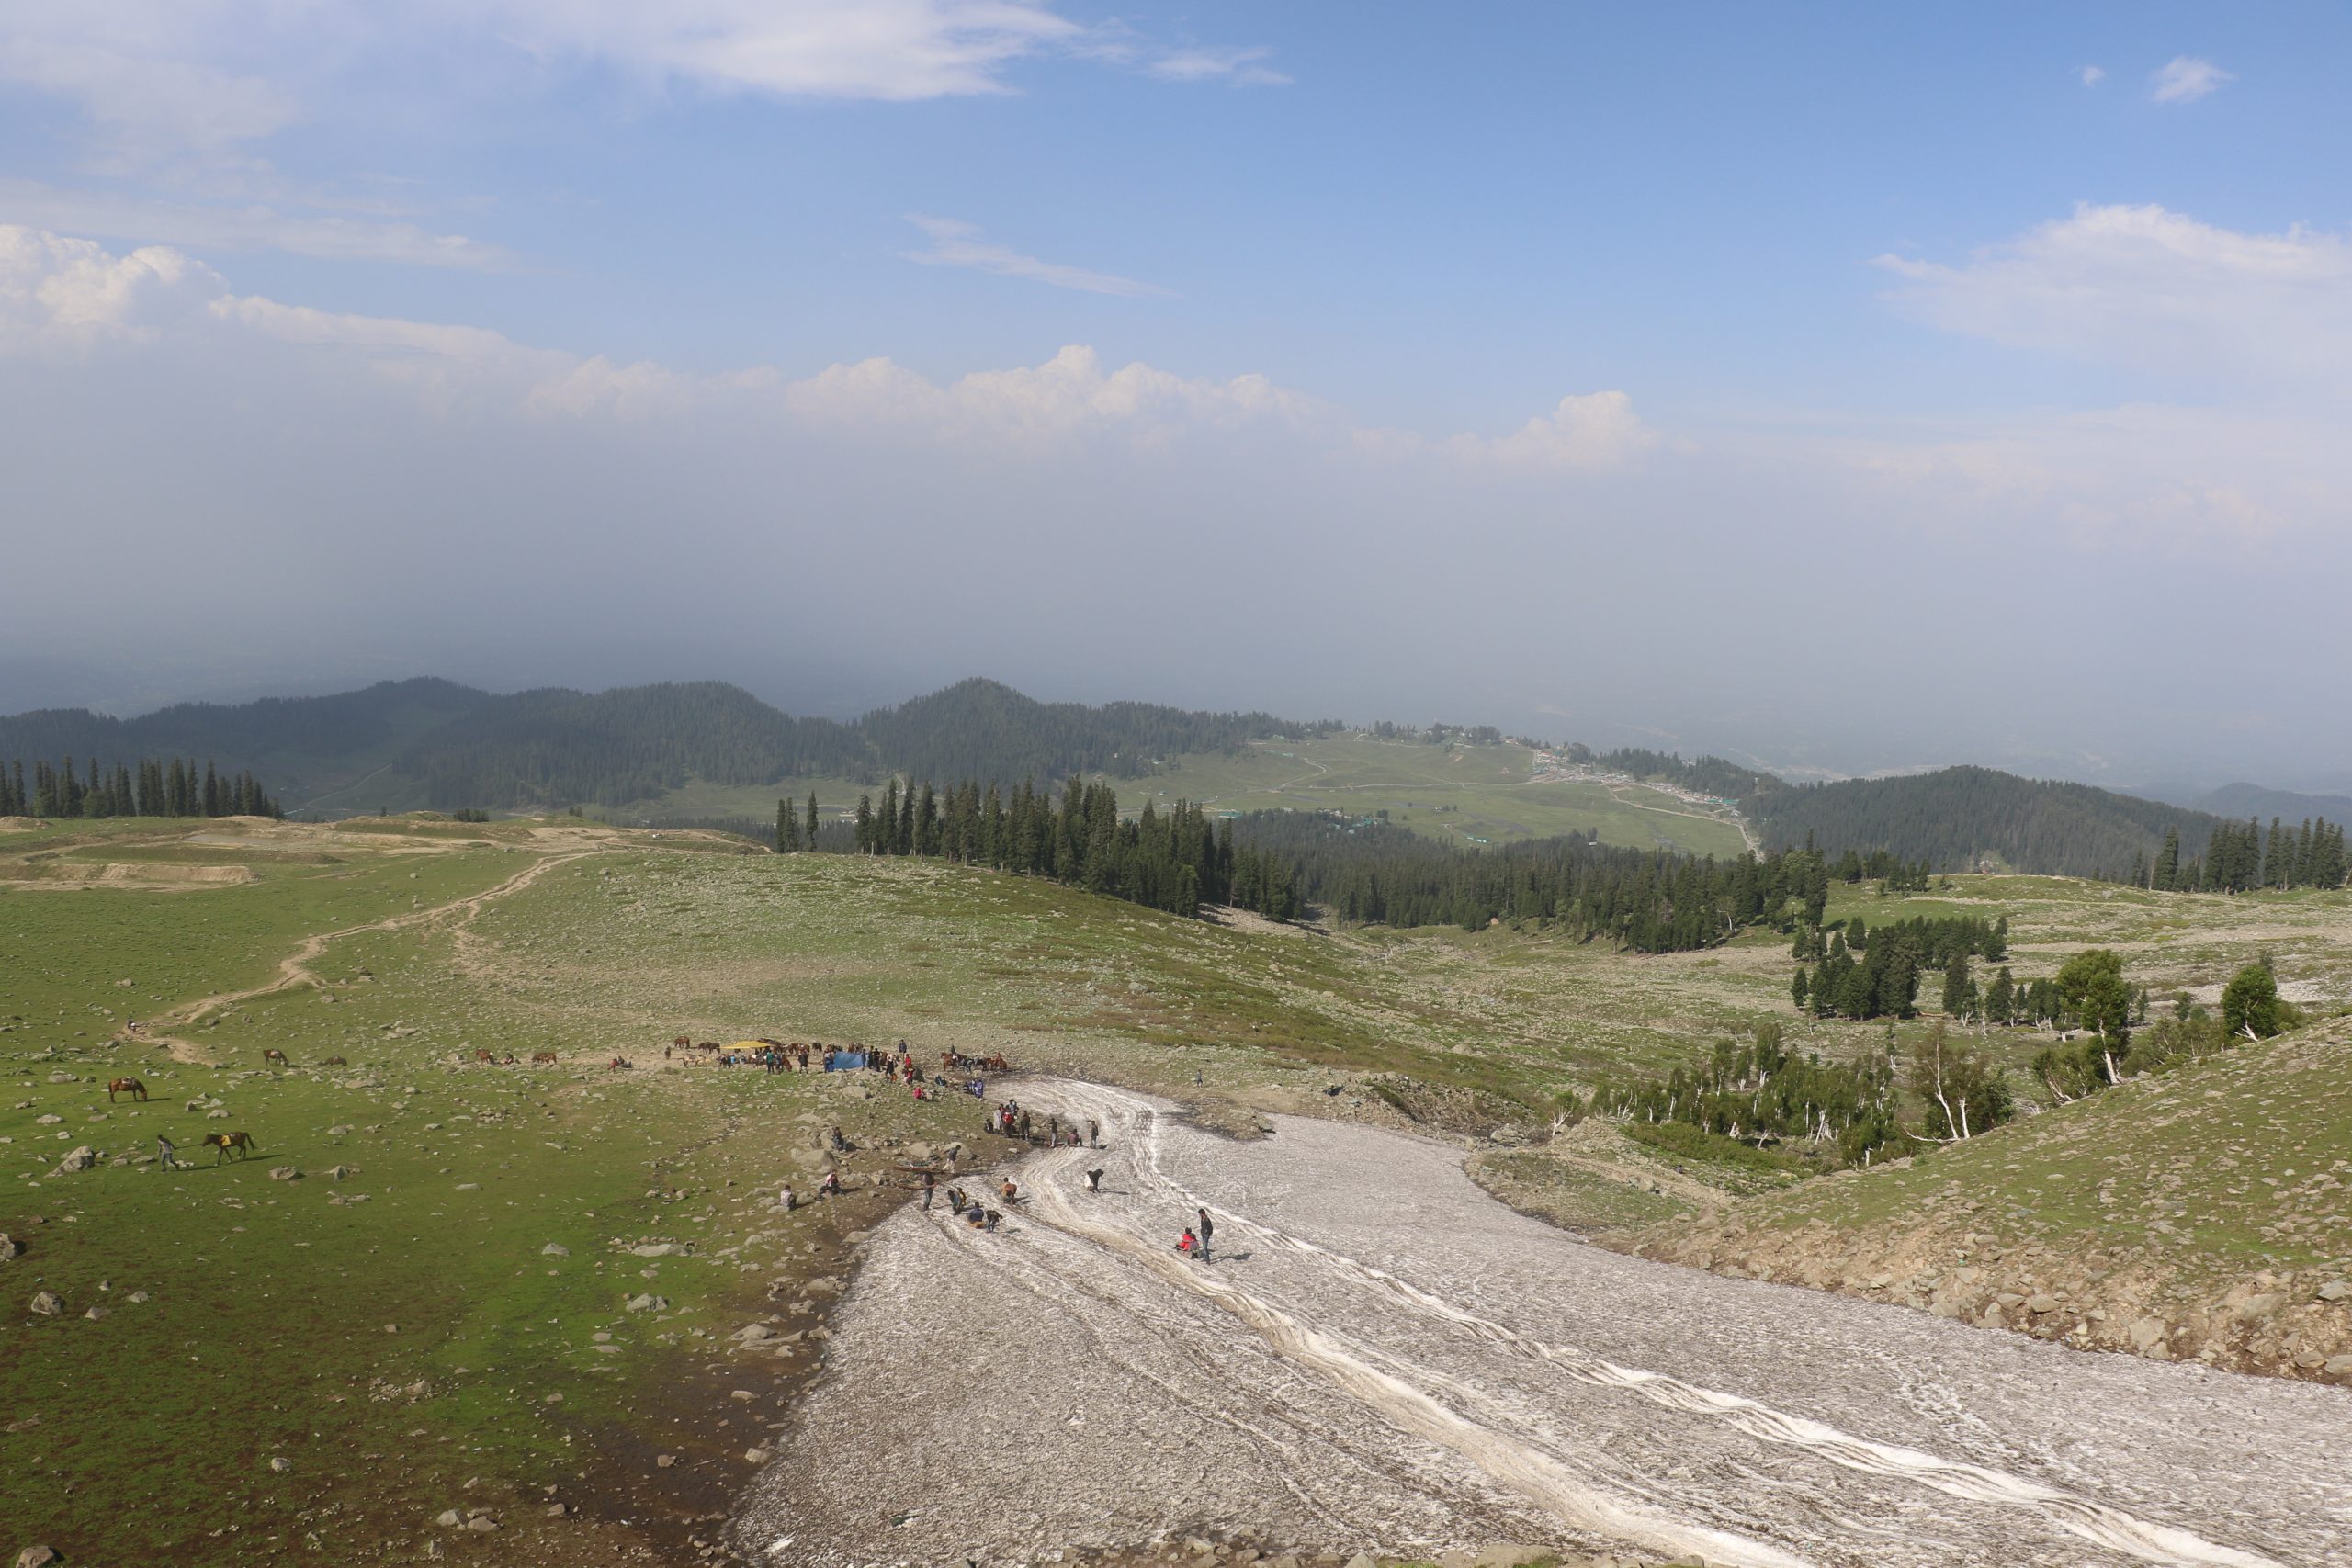 Khilanmarg meadow at Gulmarg where tourists visit and medicinal plants have vanished [image by: Mudassir Kuloo]